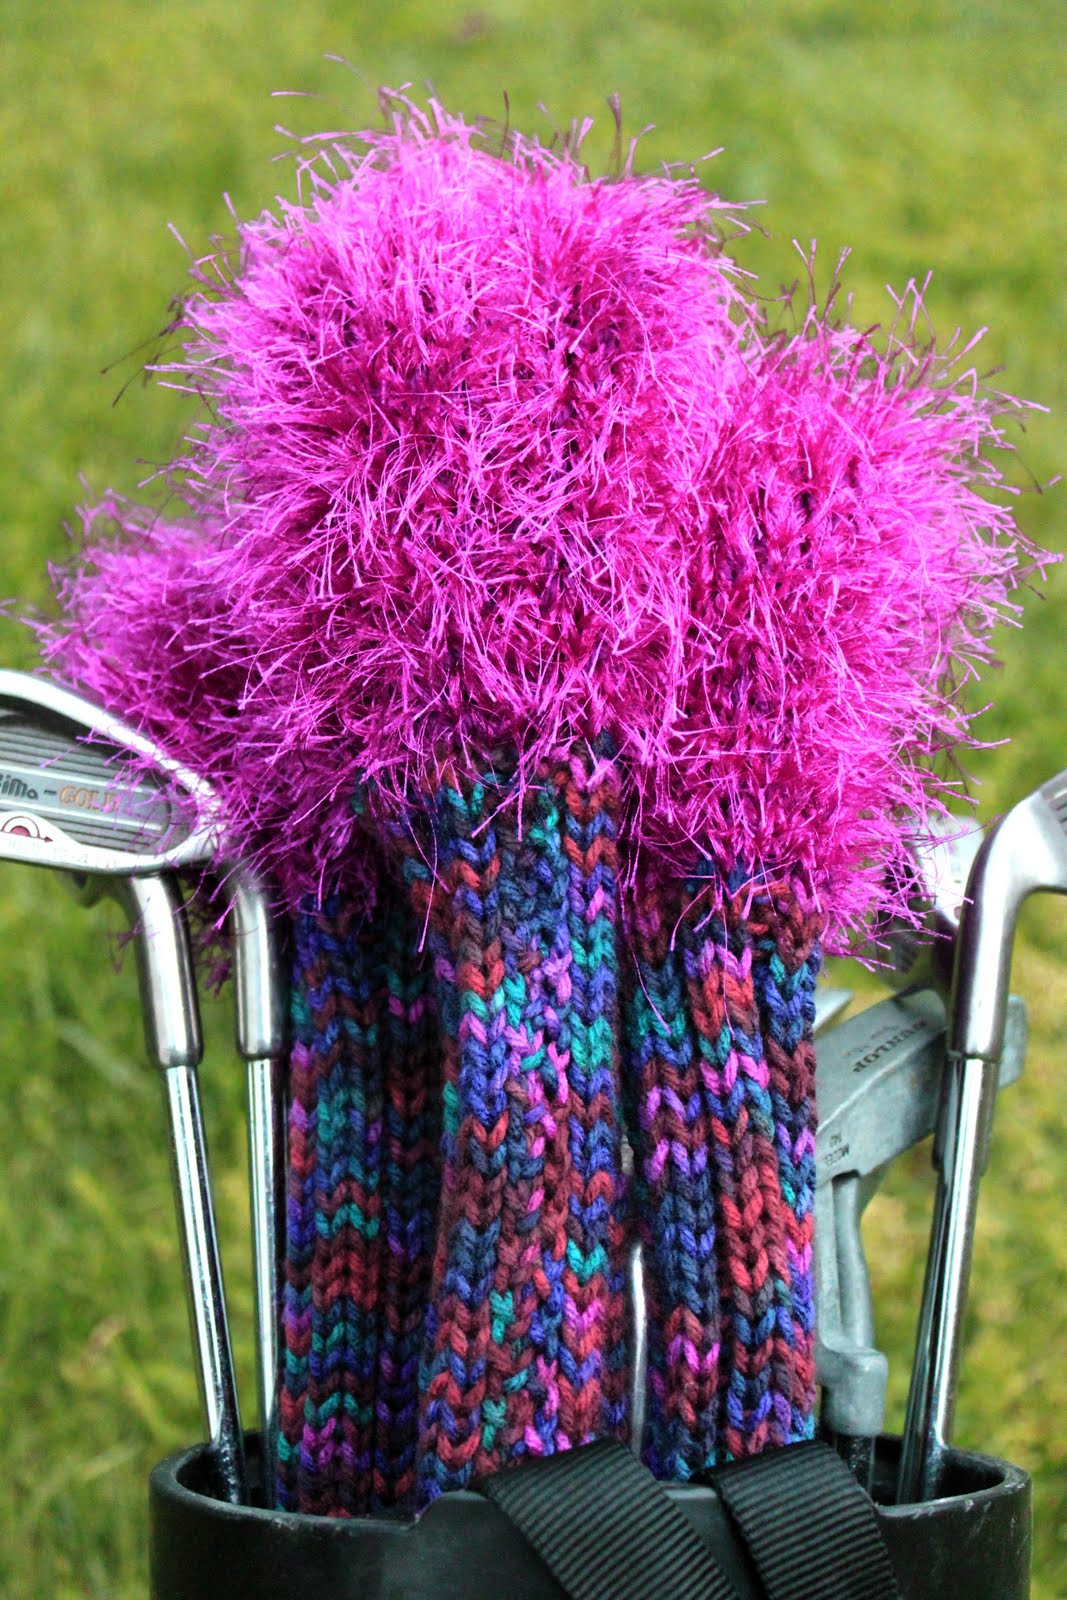 Knitting Patterns For Golf Club Covers Free - Mikes Natura